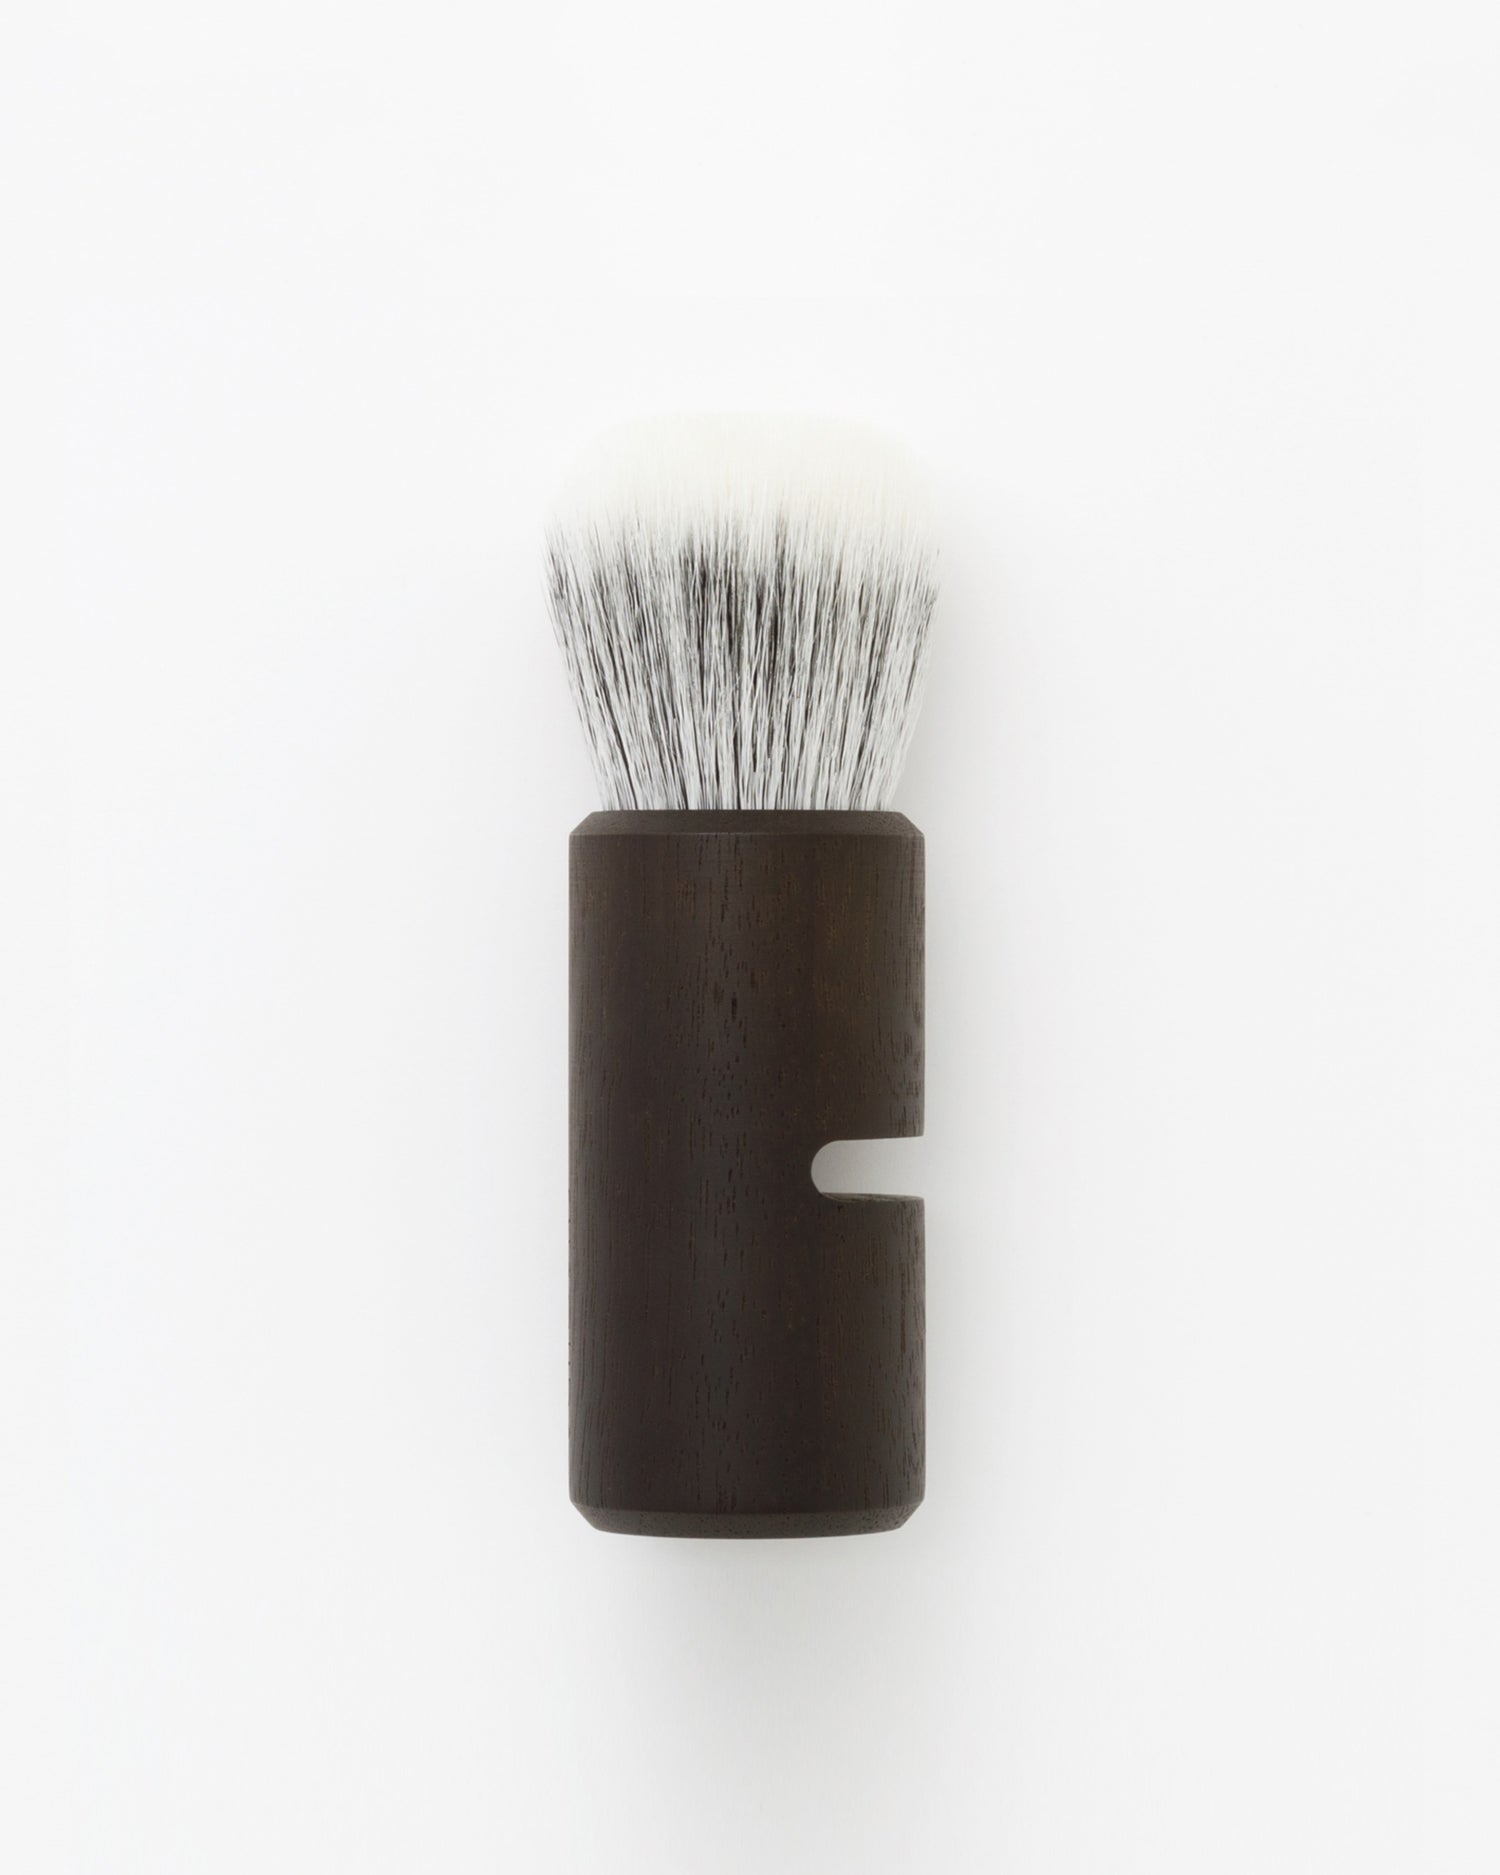 Silhouetted image of soft Jiva face cleansing and shaving series walnut, boar bristle, and goat hair brush by Shaquda against white-gray background.